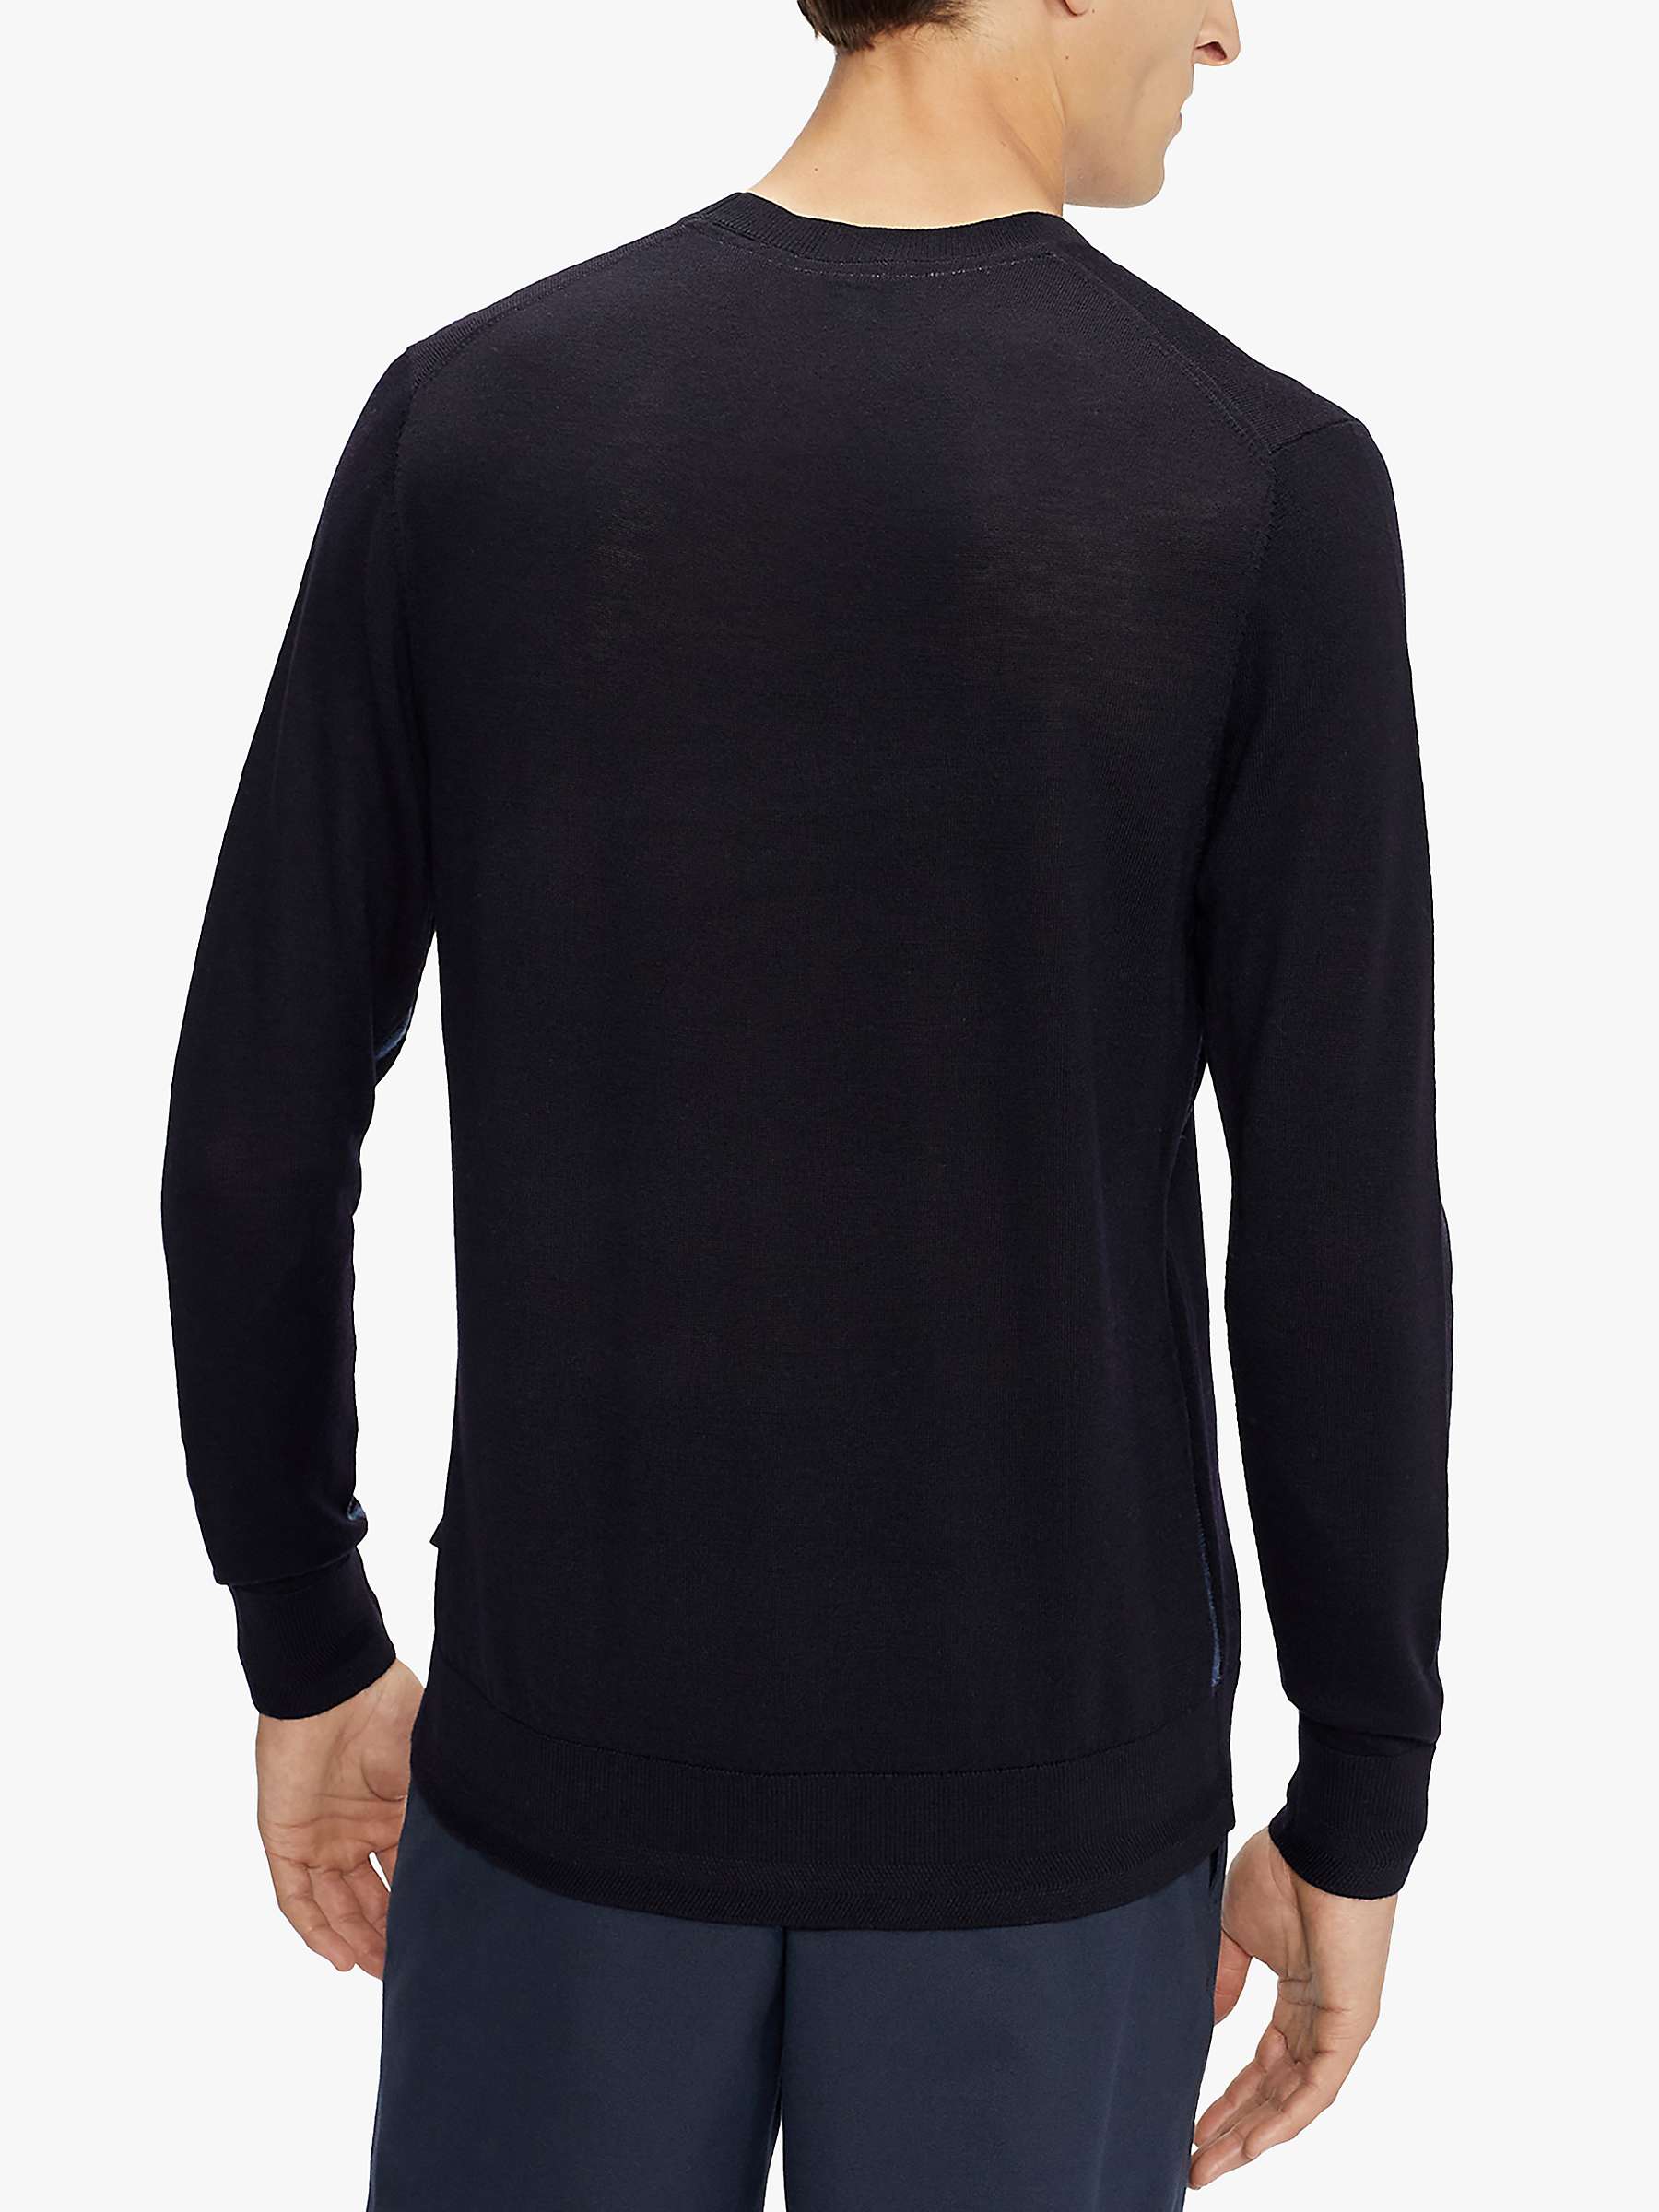 Ted Baker Cardiff Wool Jumper, Navy at John Lewis & Partners